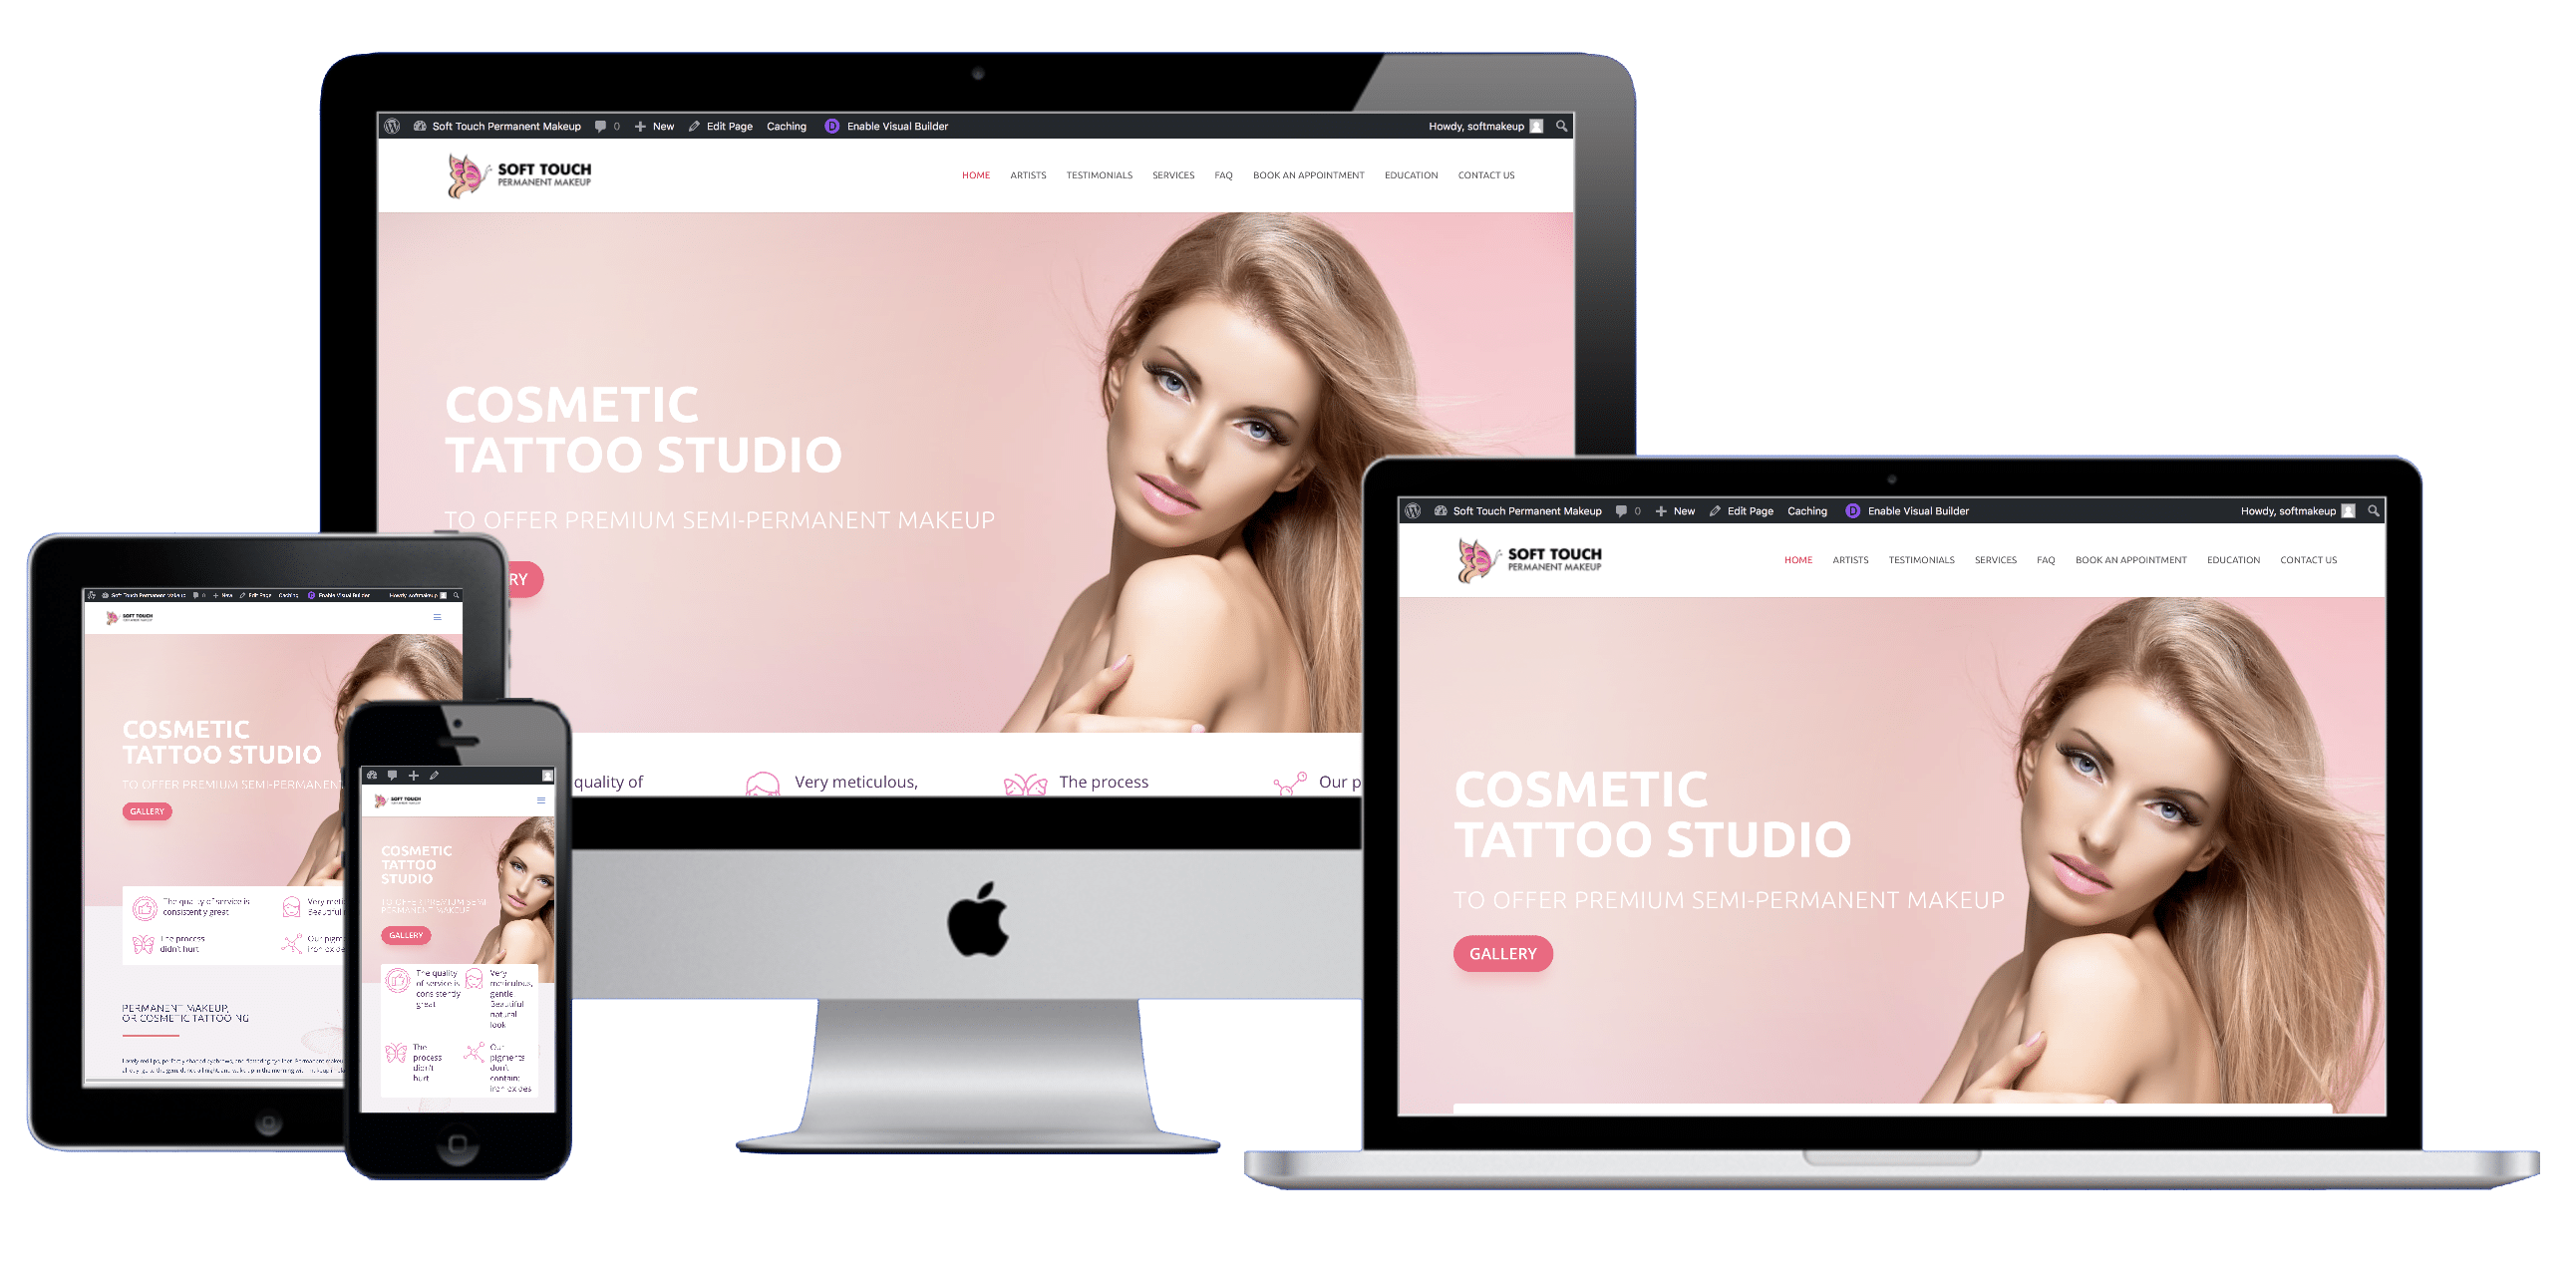 Web Design for Soft Touch Permanent Makeup